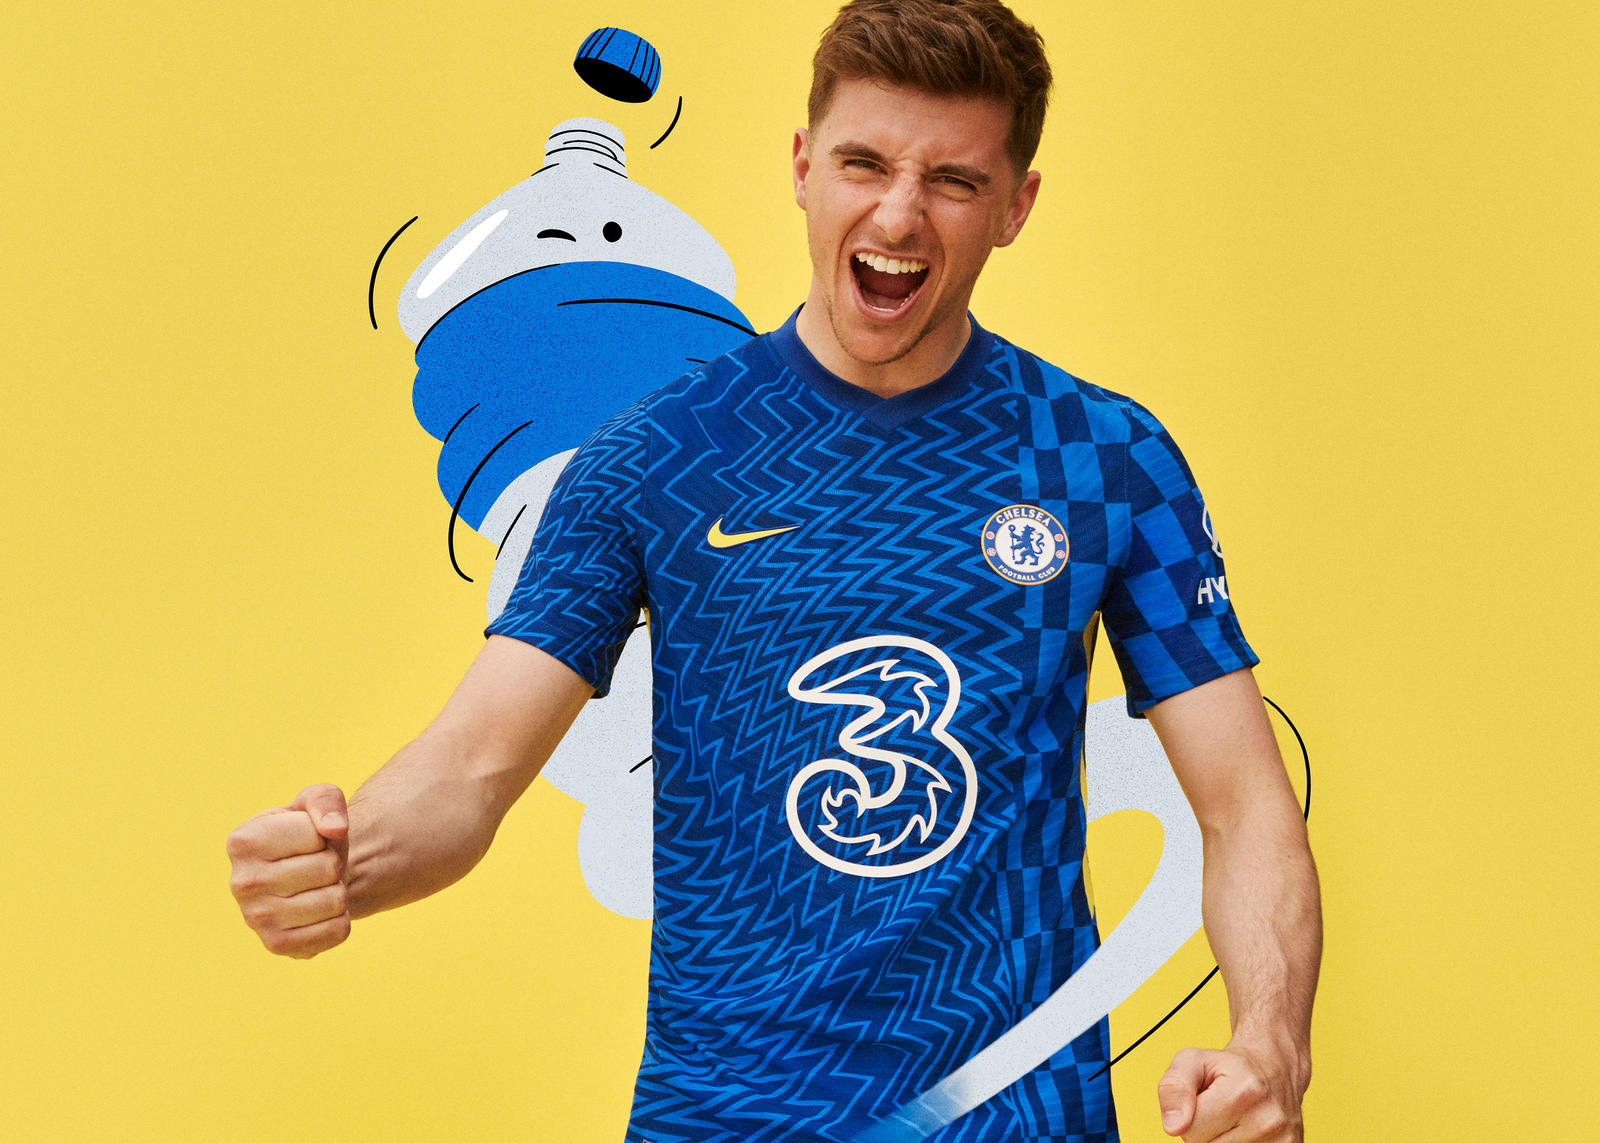 Chelsea 2021 2022 Home Kit Official Image Release Date